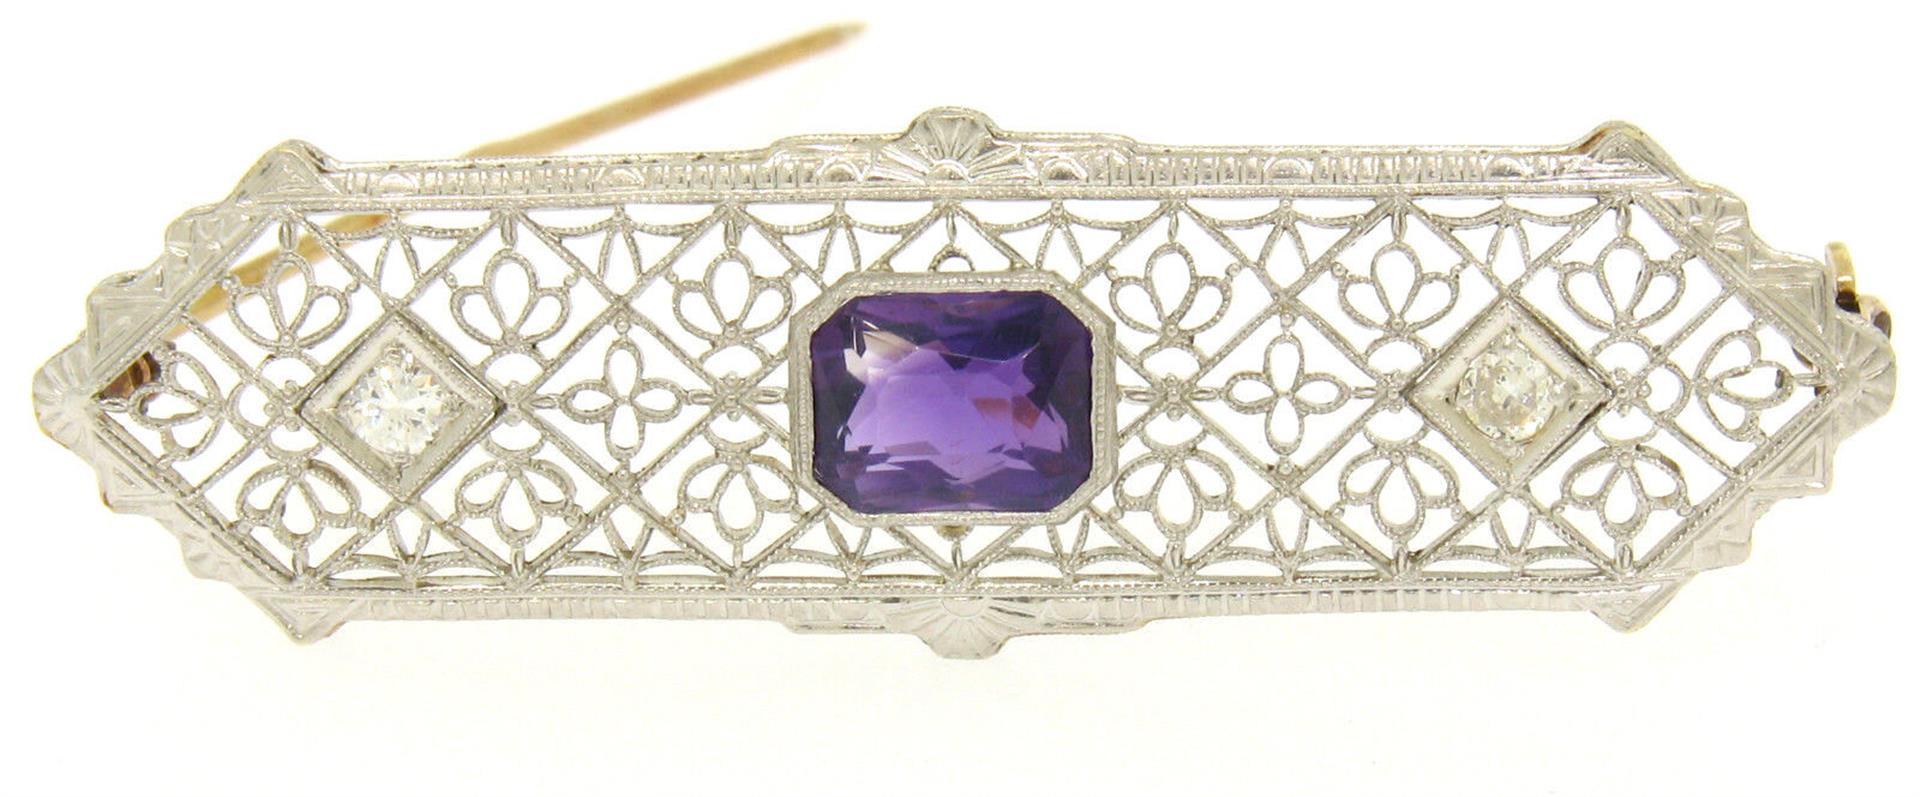 Antique Art Deco 14k Two Tone Gold Amethyst & Old Diamond Etched Filigree Brooch